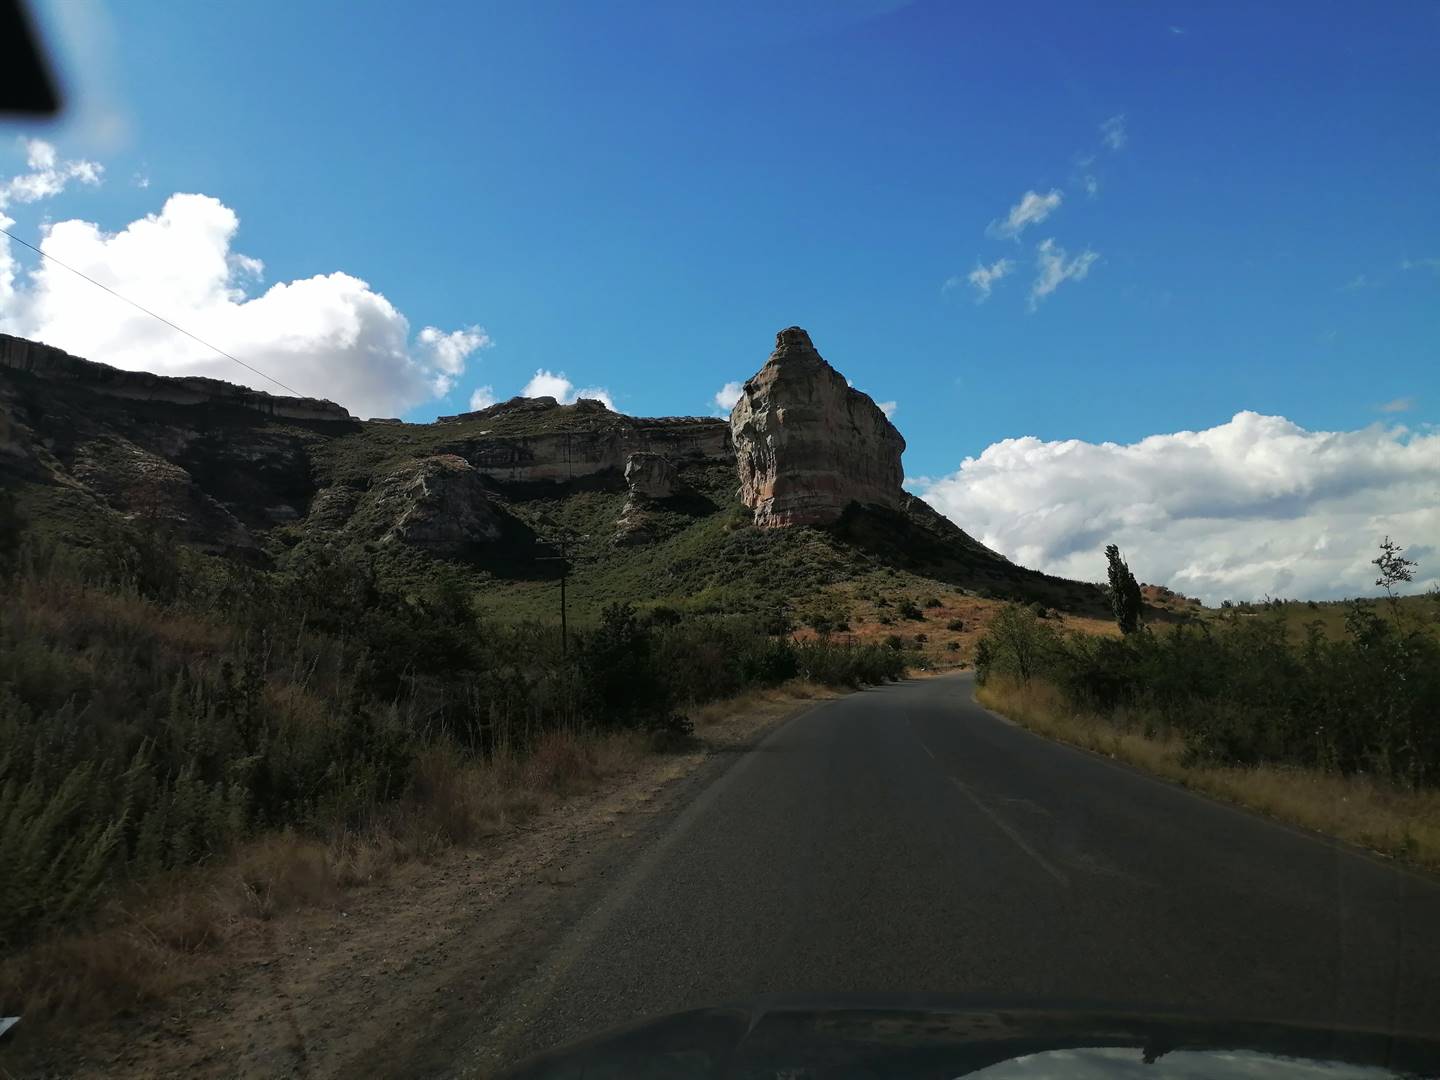 The majestic mountains on the way to Clarens are a sight to behold.